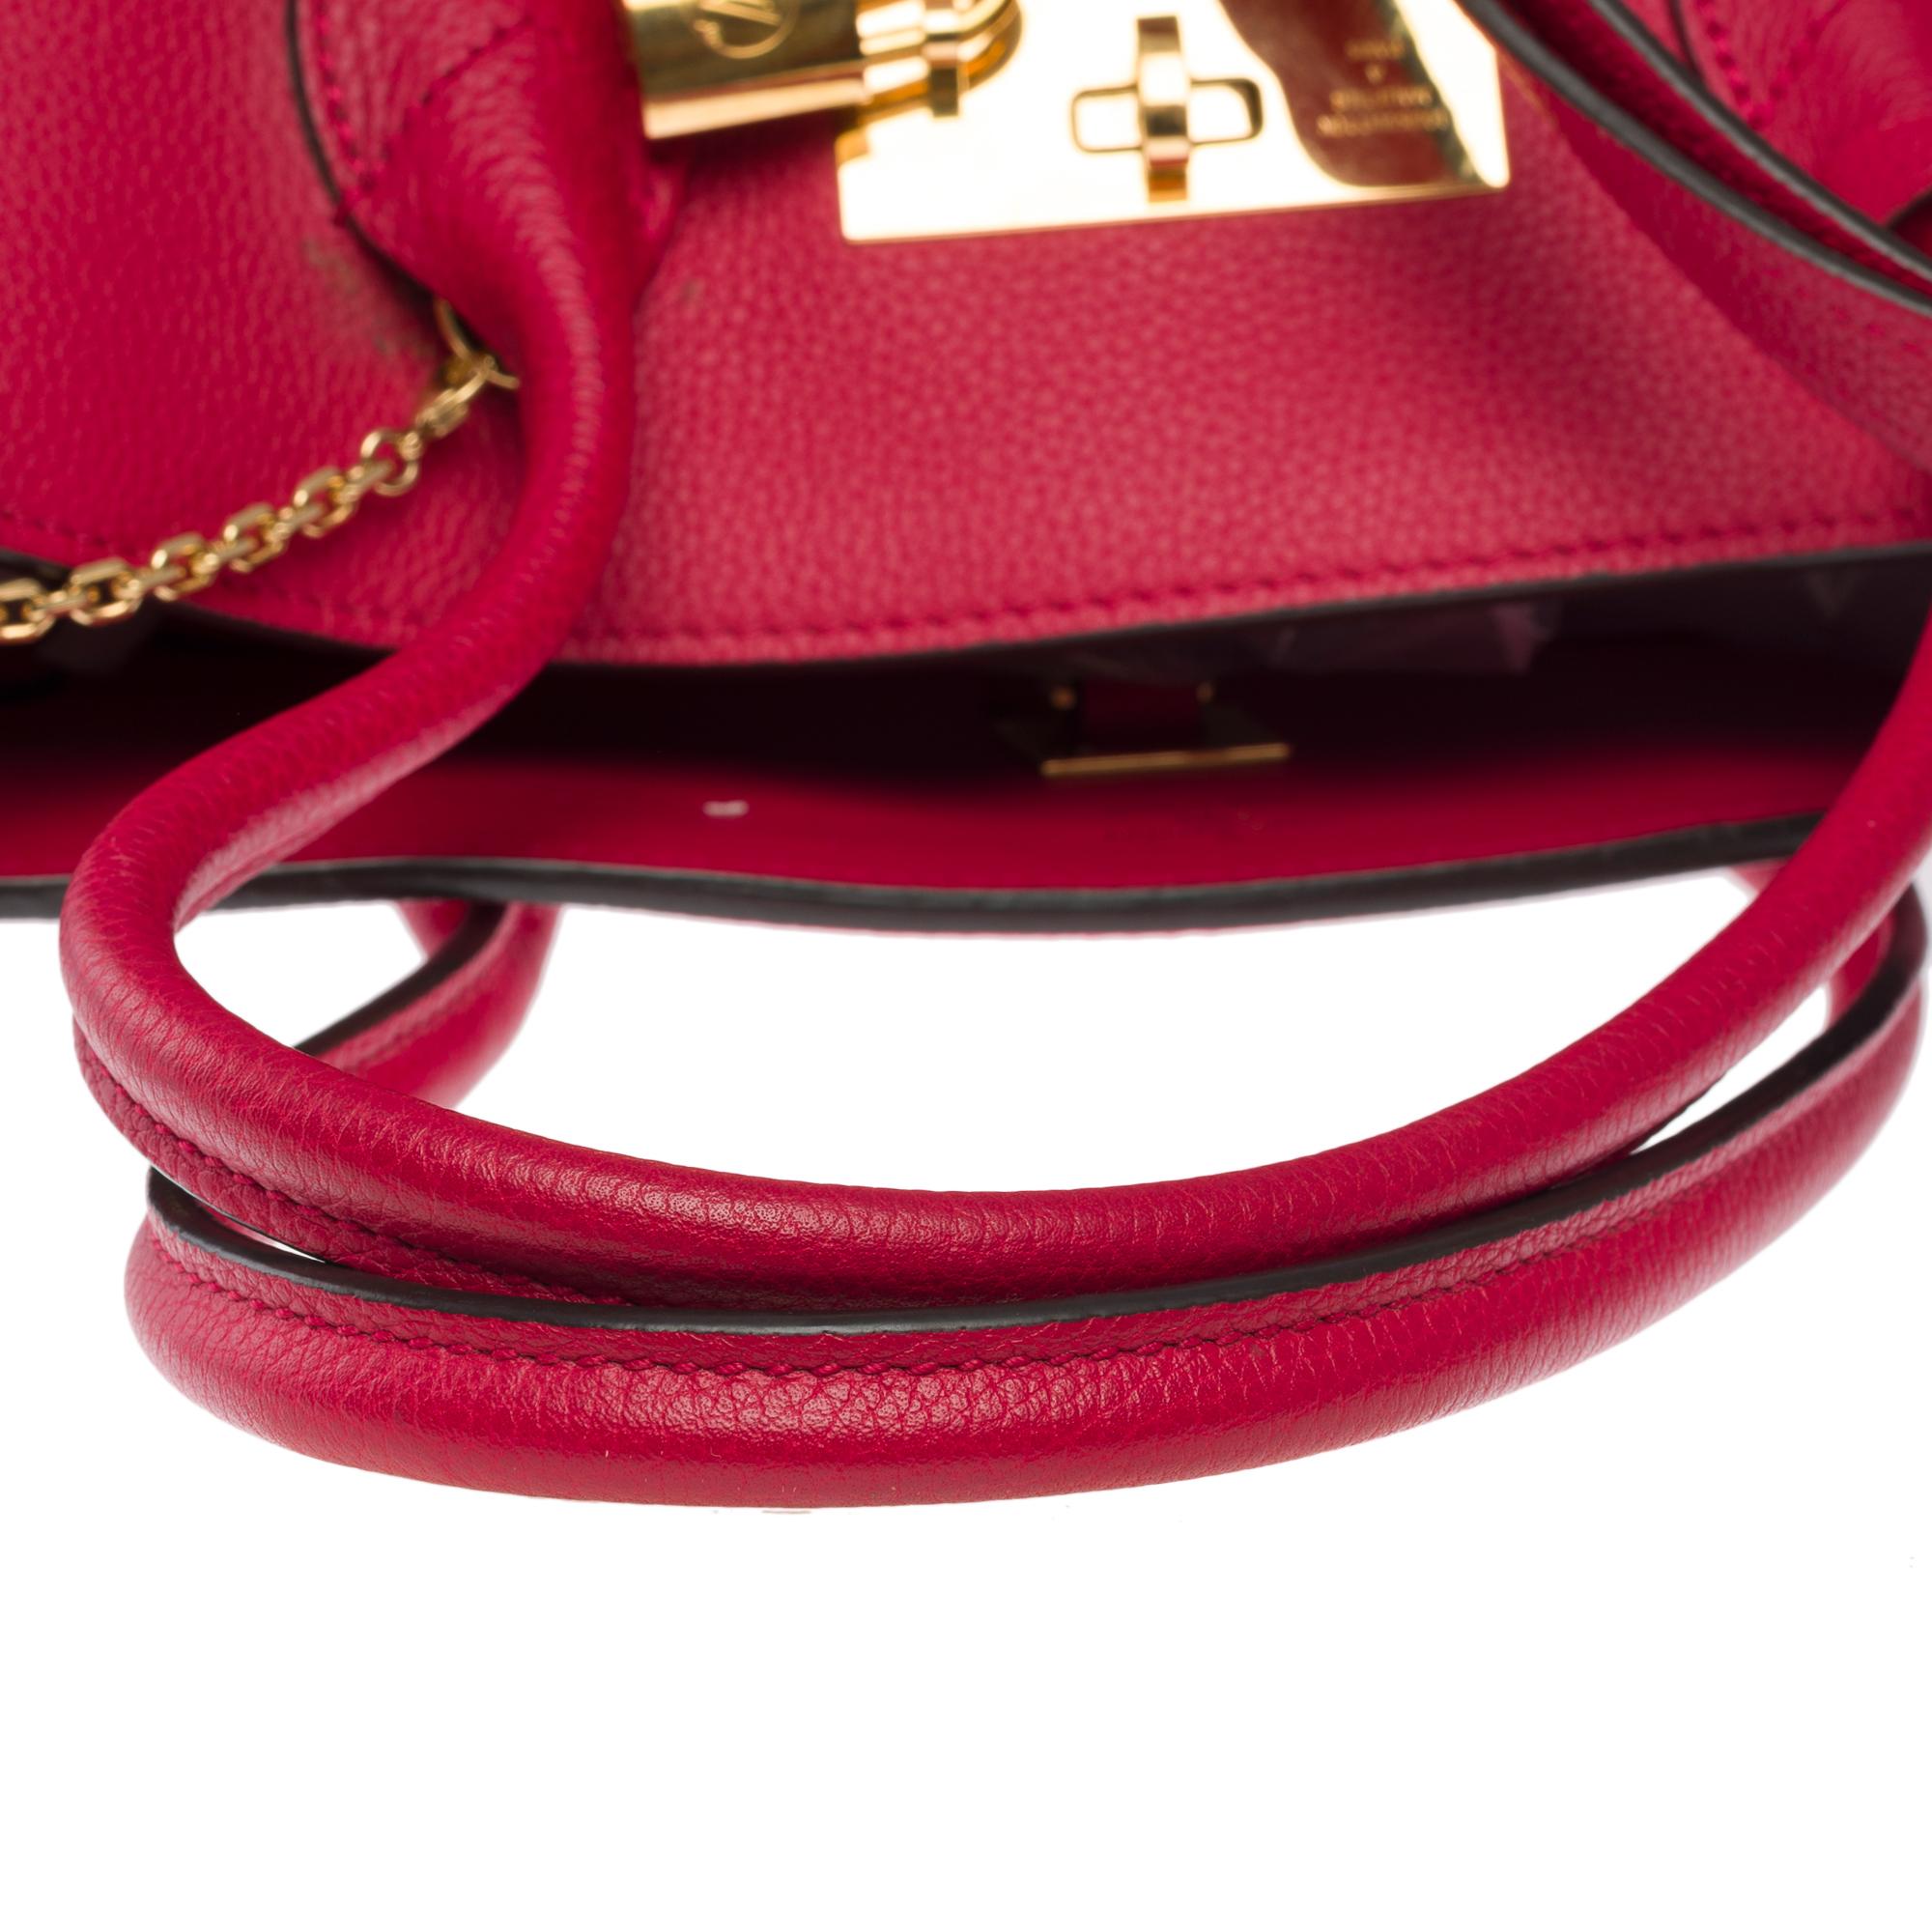 Lovely Louis Vuitton Milla MM handbag strap in Red Calf  leather, GHW For Sale 5